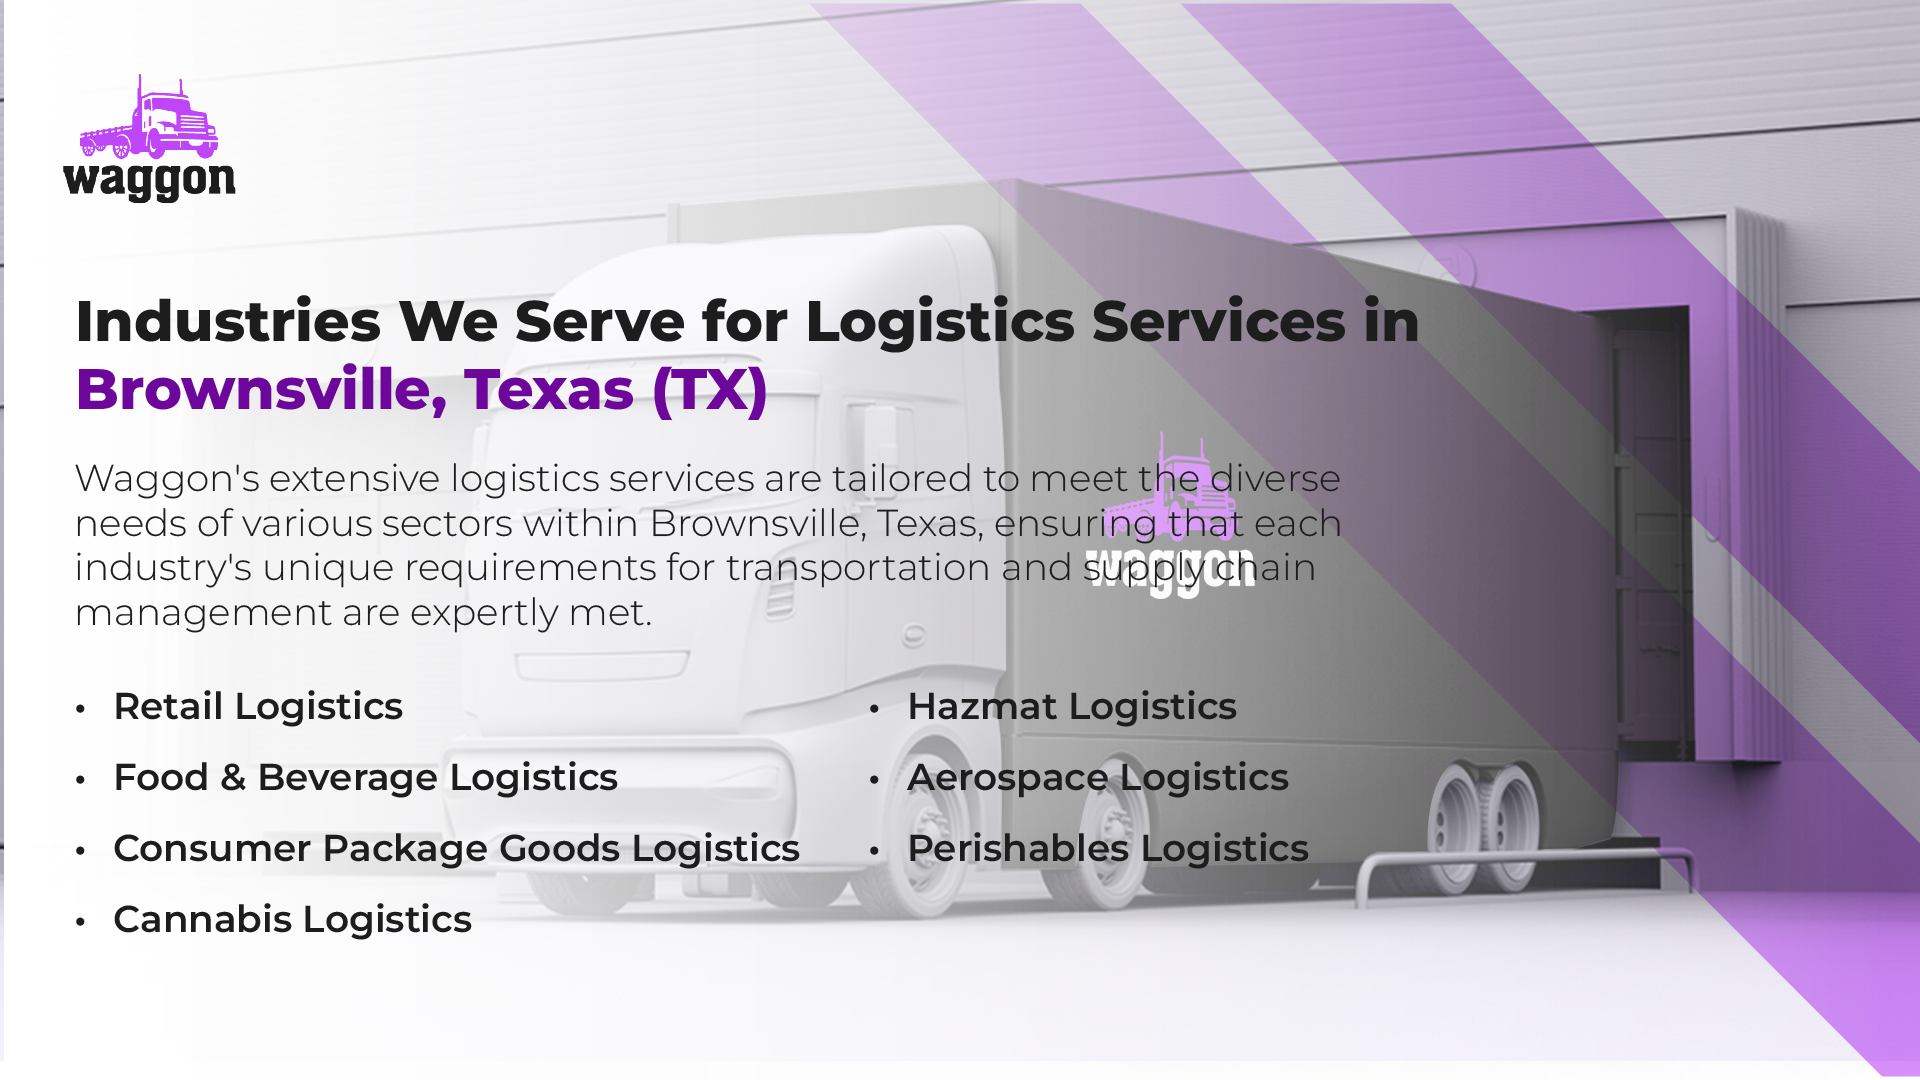 Industries We Serve for Logistics Services in Brownsville, Texas (TX)